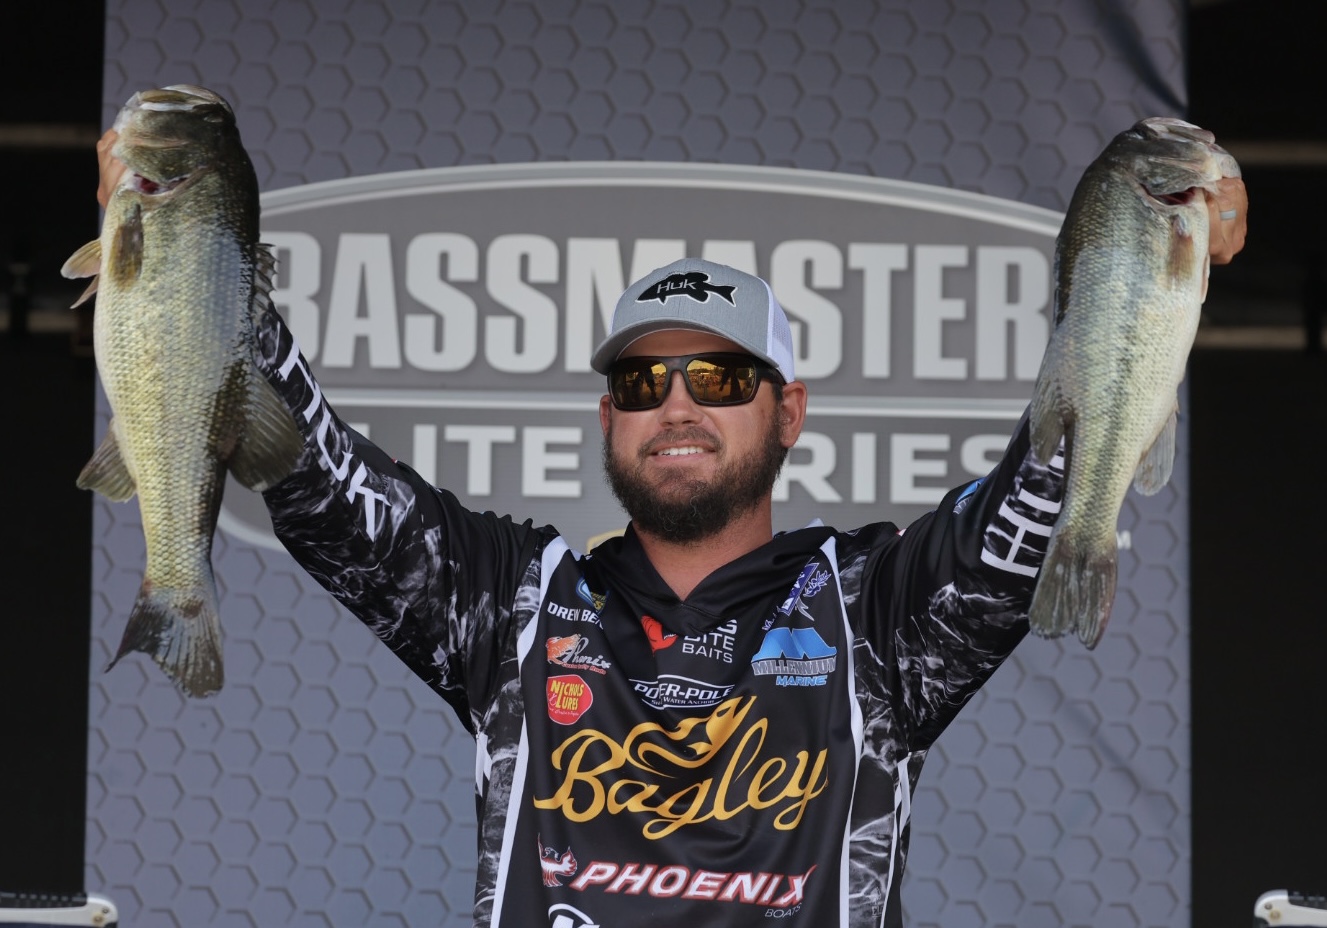 Drew Benton claims Day 2 lead in Bassmaster Elite Series event at Lake  Murray – Anglers Channel